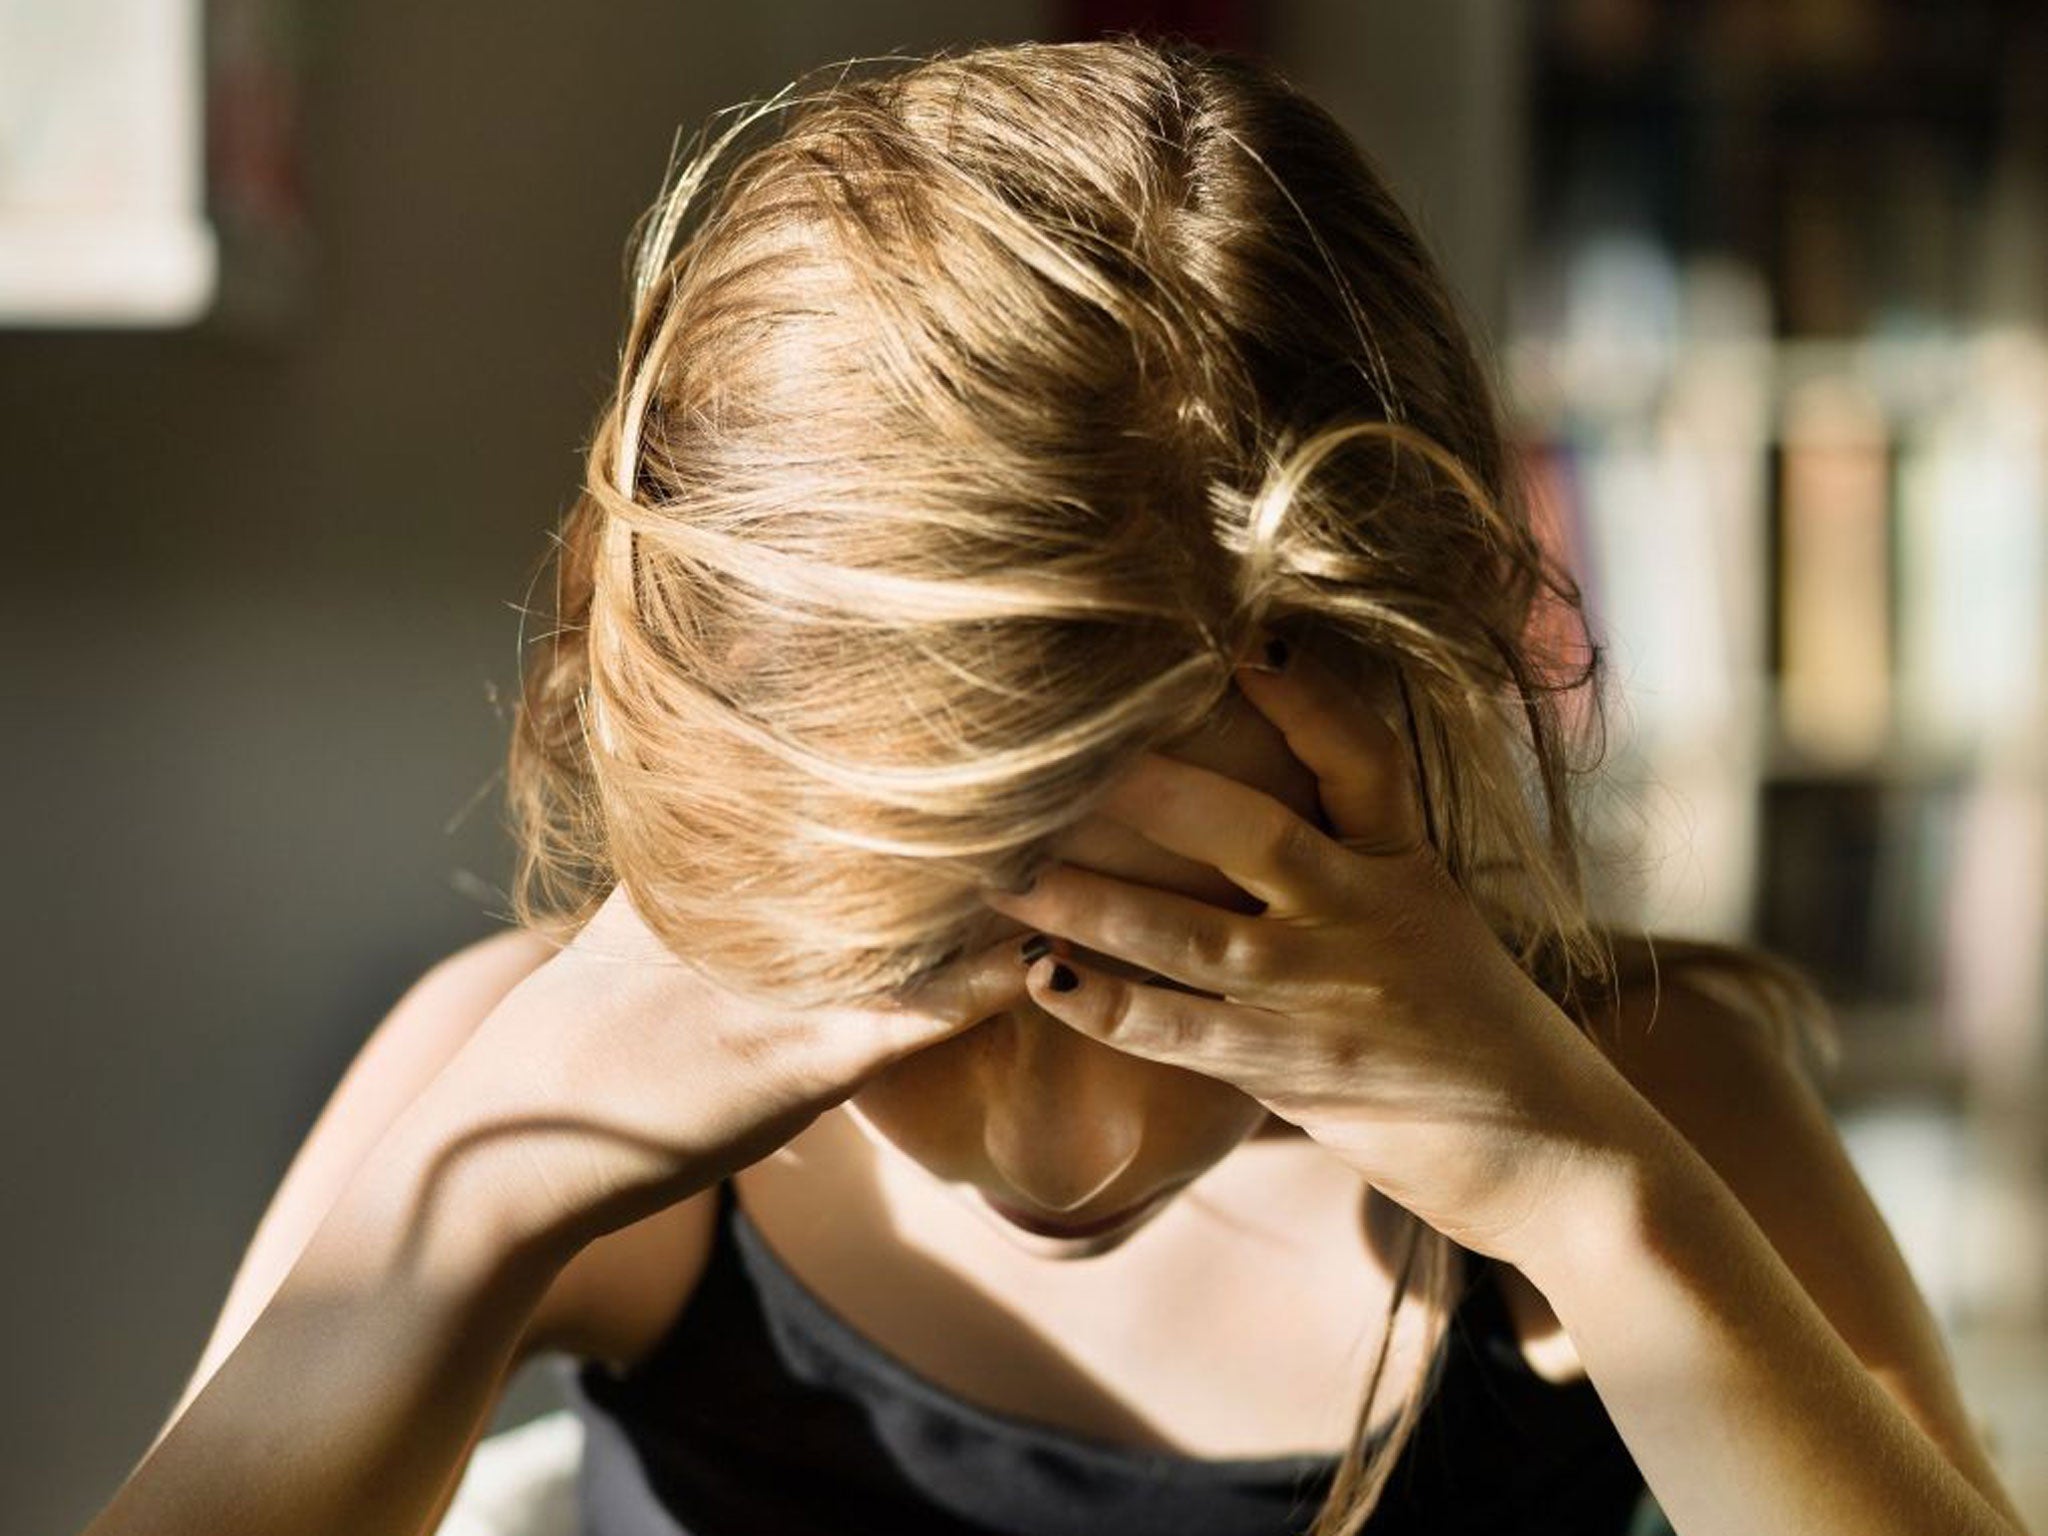 The number of teenagers admitted to hospital with eating disorders has nearly doubled